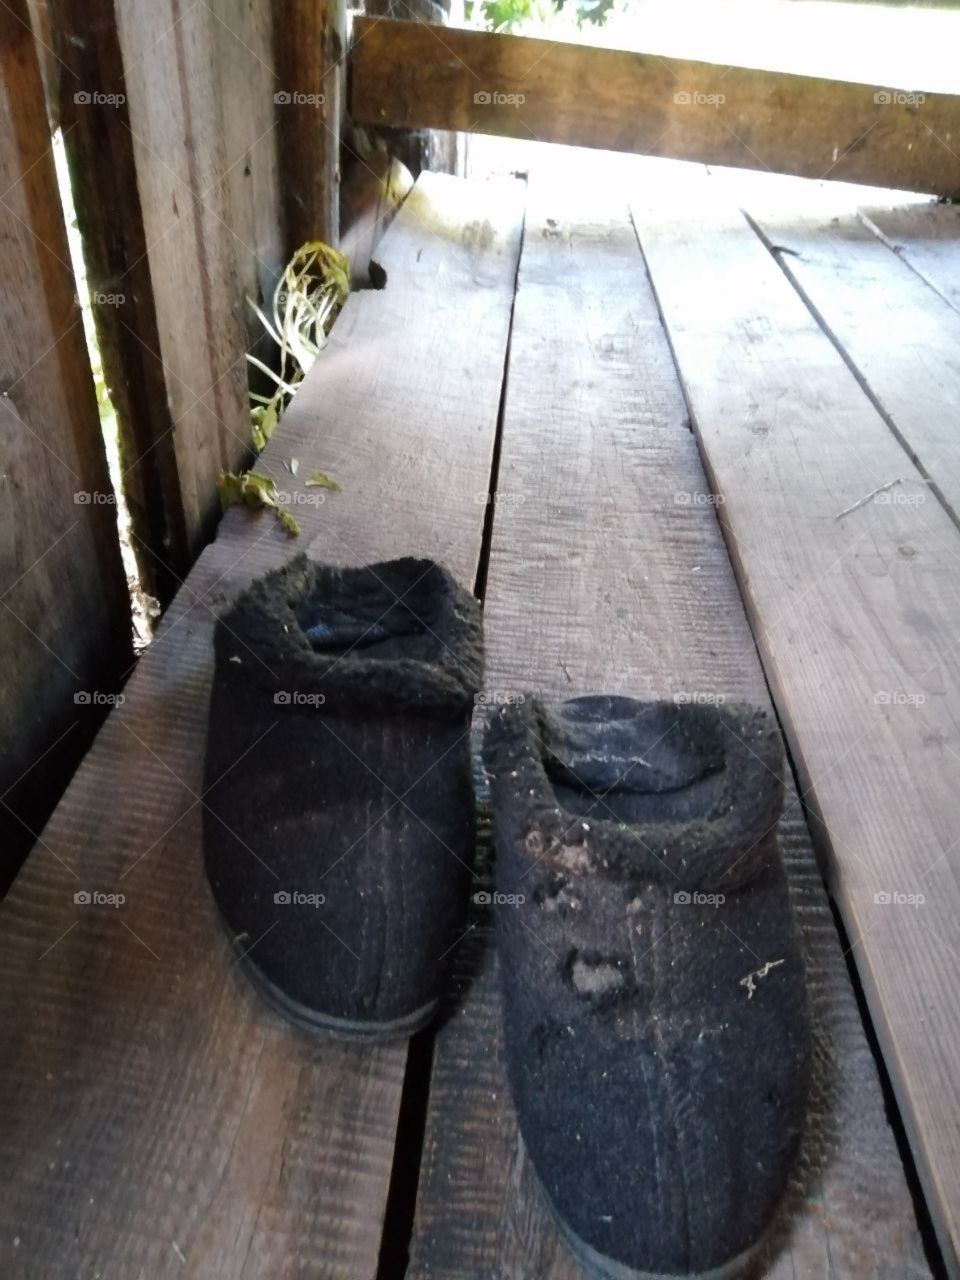 Old black uggs trampled on the floor of untreated boards